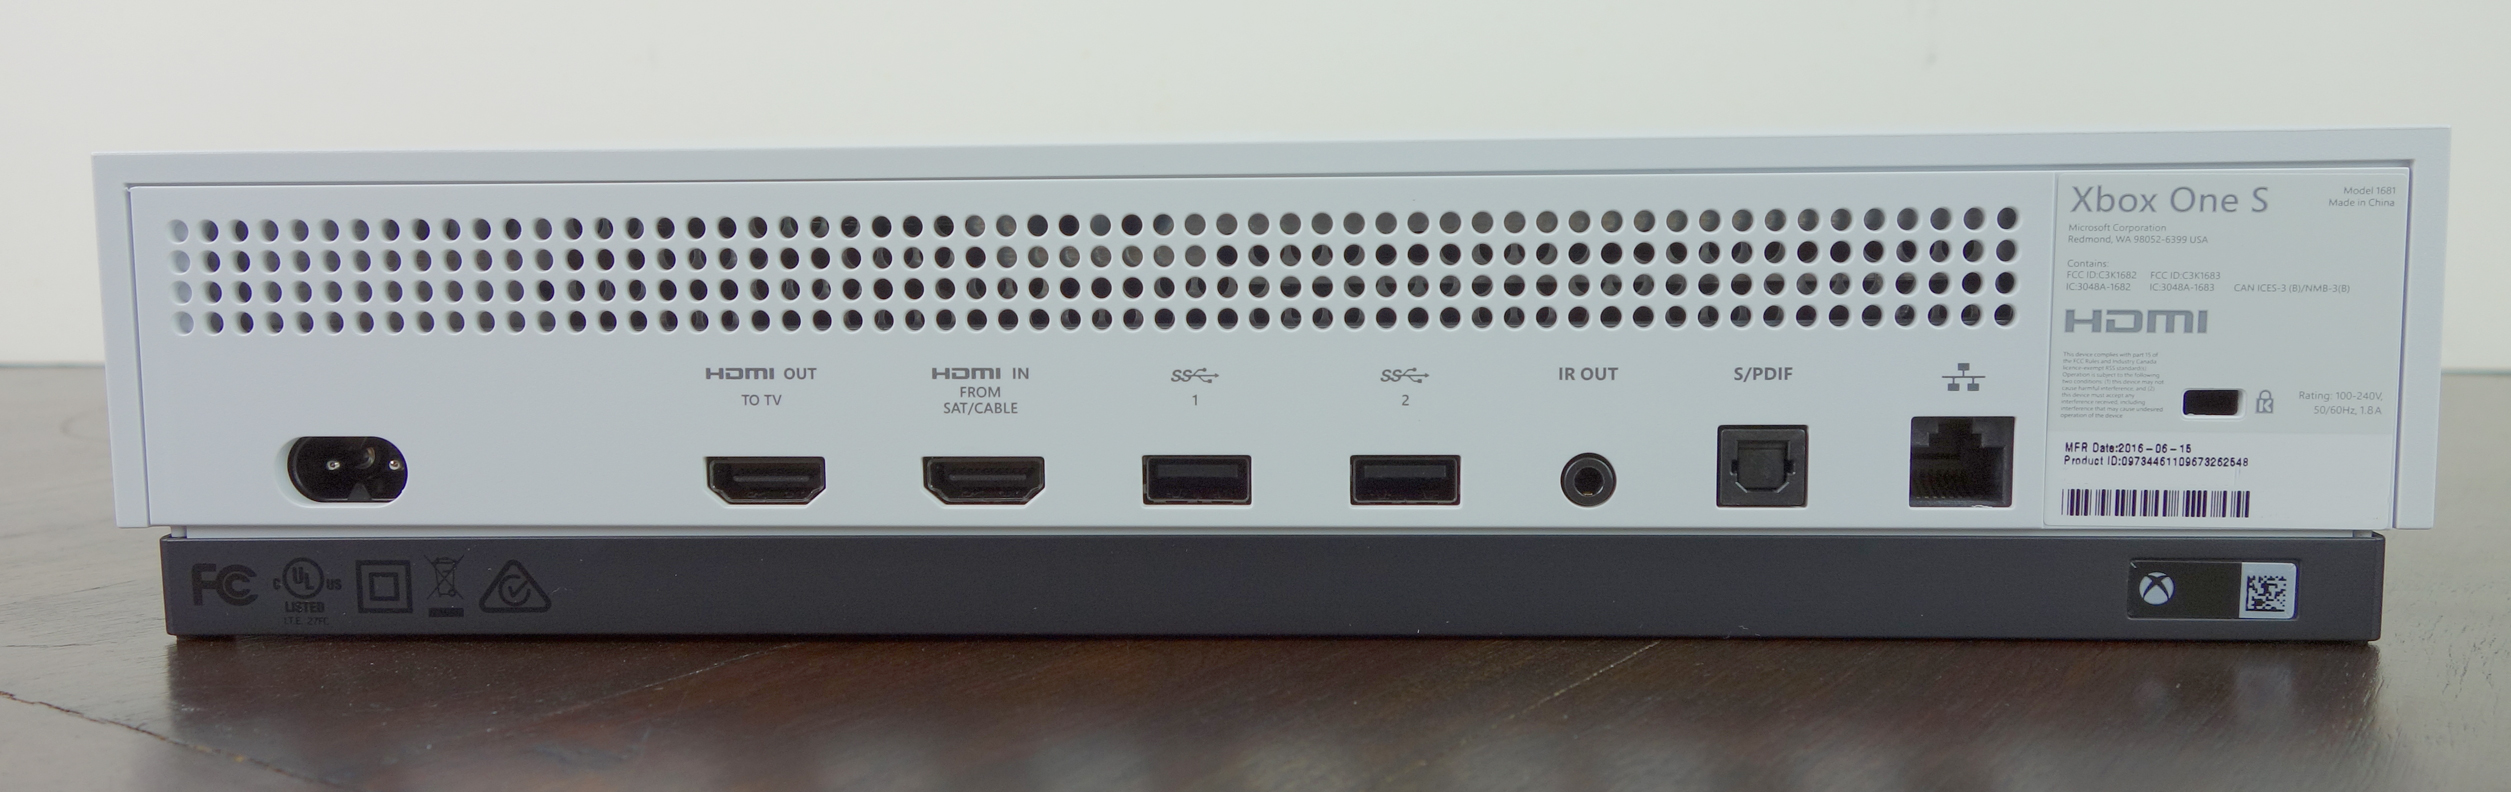 Xbox One S back ports real 2TB